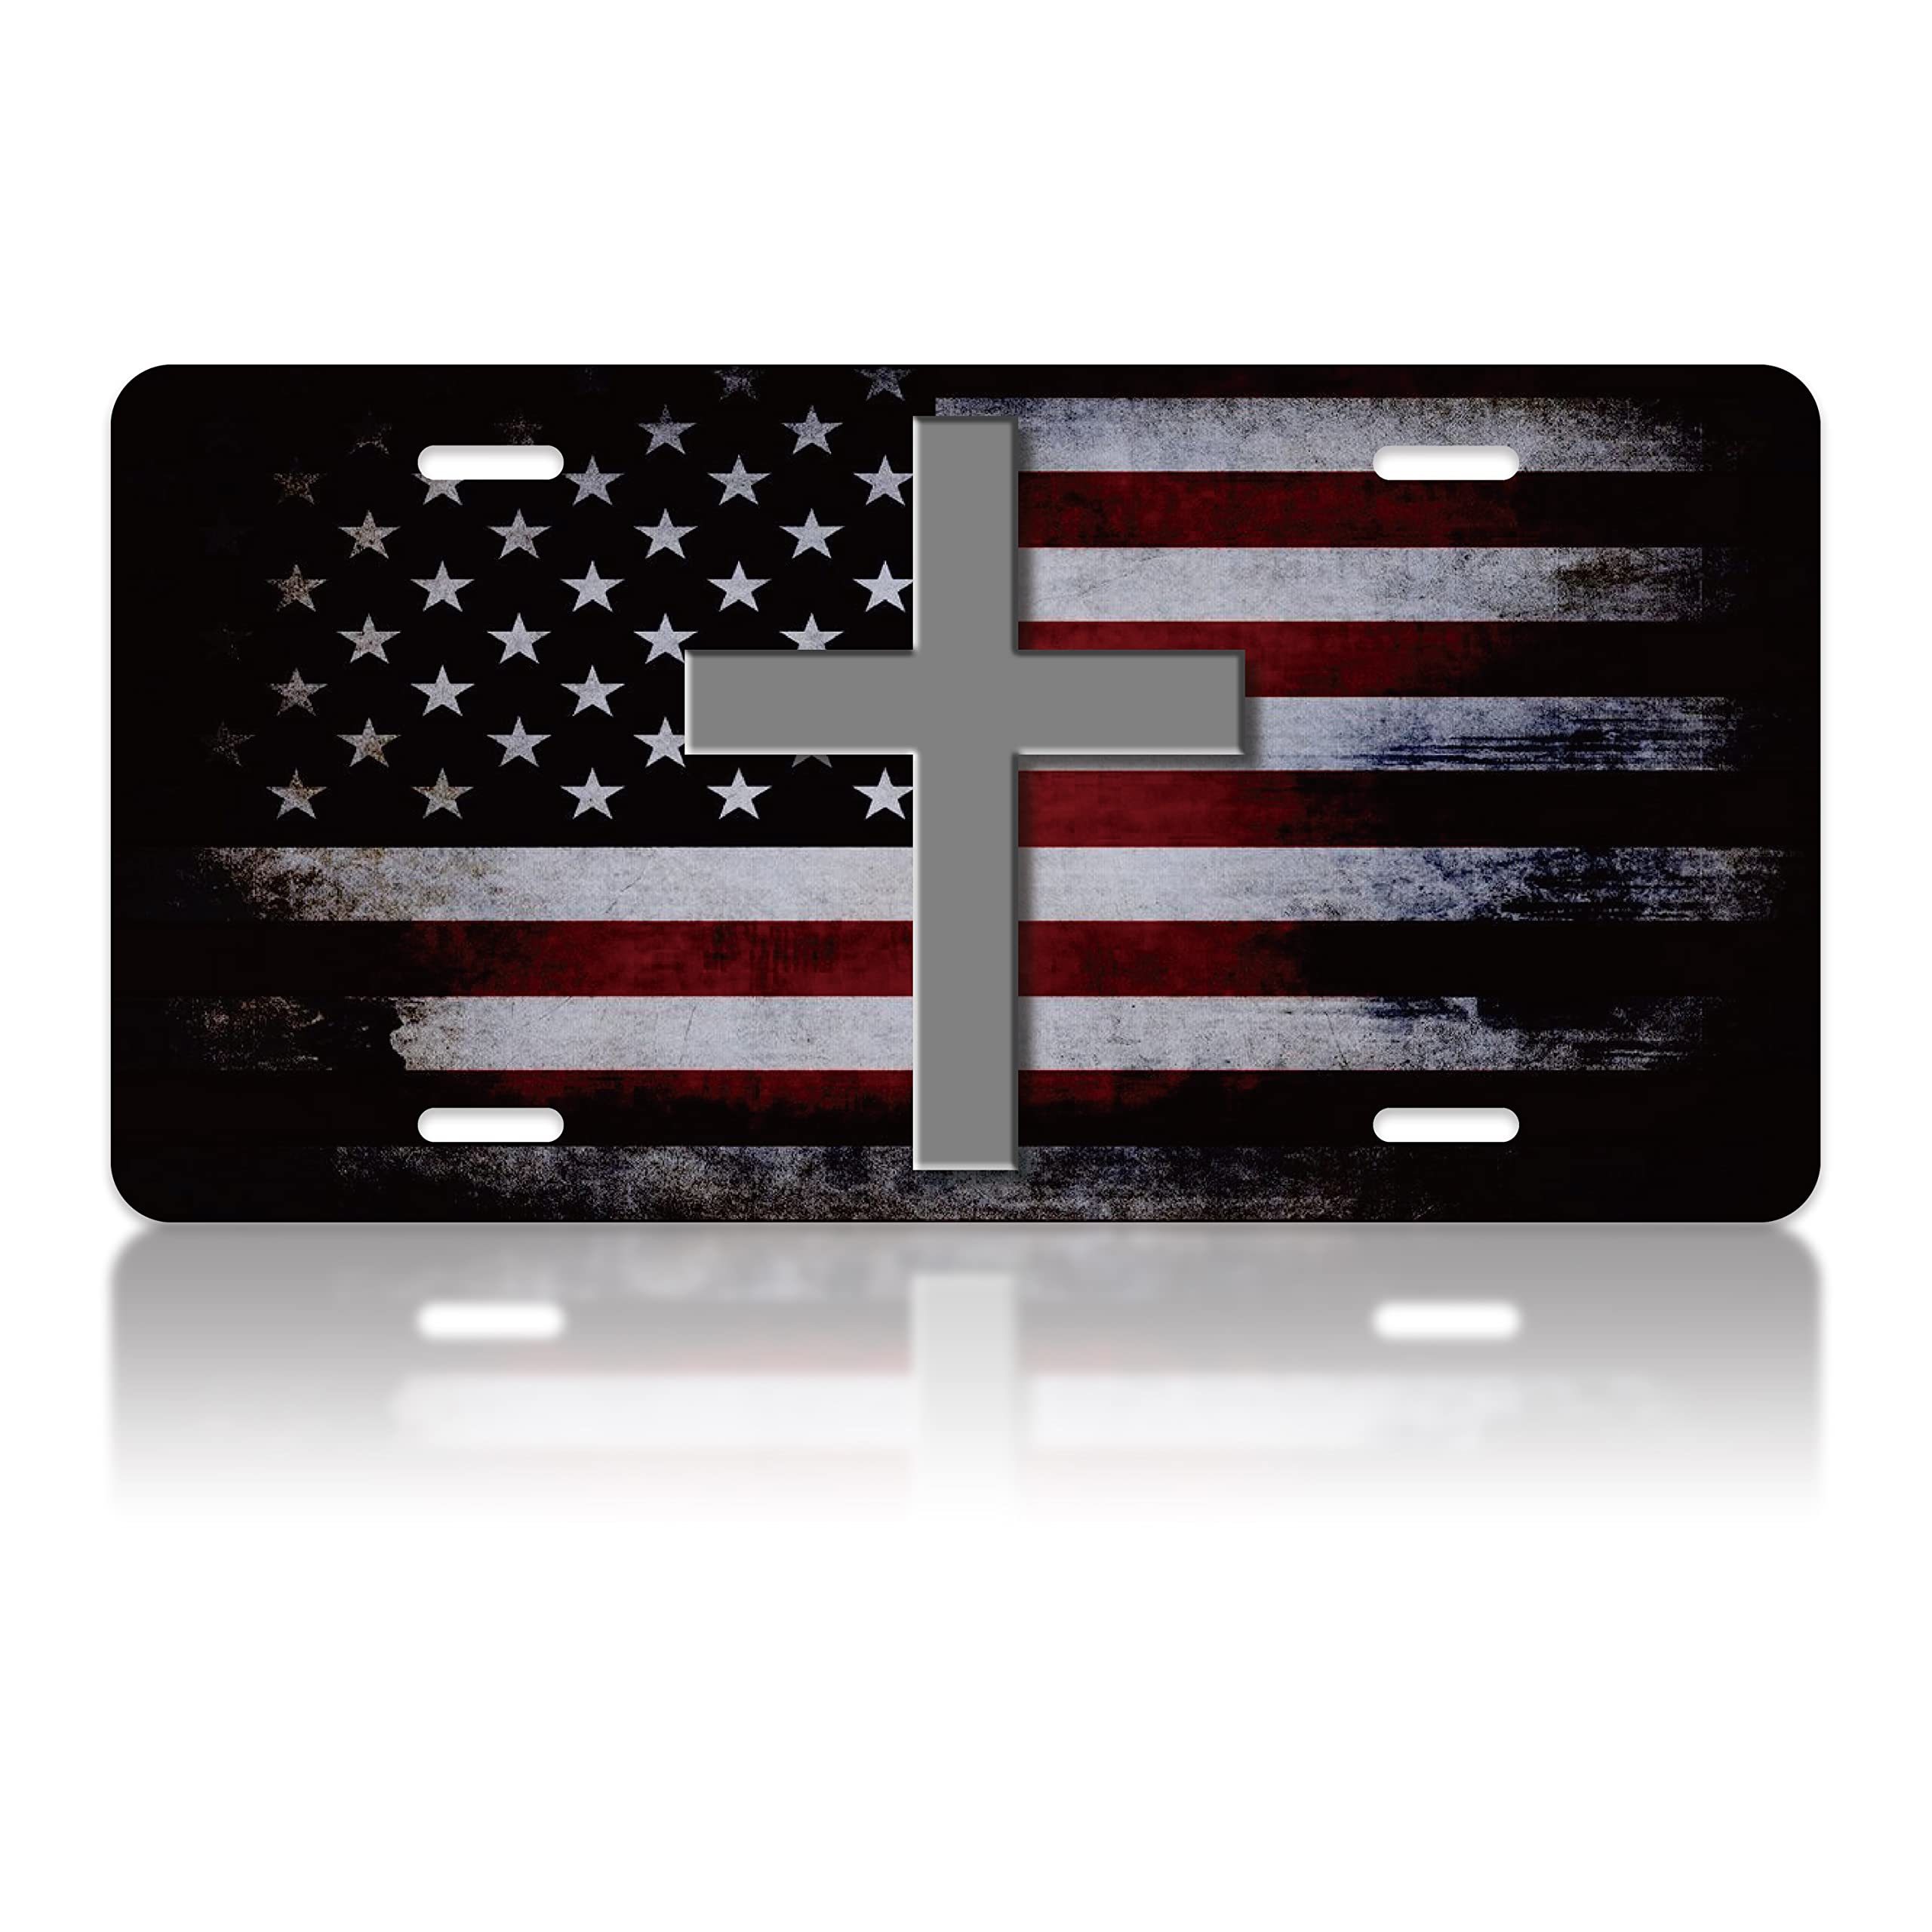  USA Fishing Flag License Plate Cover Aluminum Car Decorative  Front License Plate Covers Novelty Vanity Tag Rust-Proof License Plate  Protector 6x12 Inch : Automotive